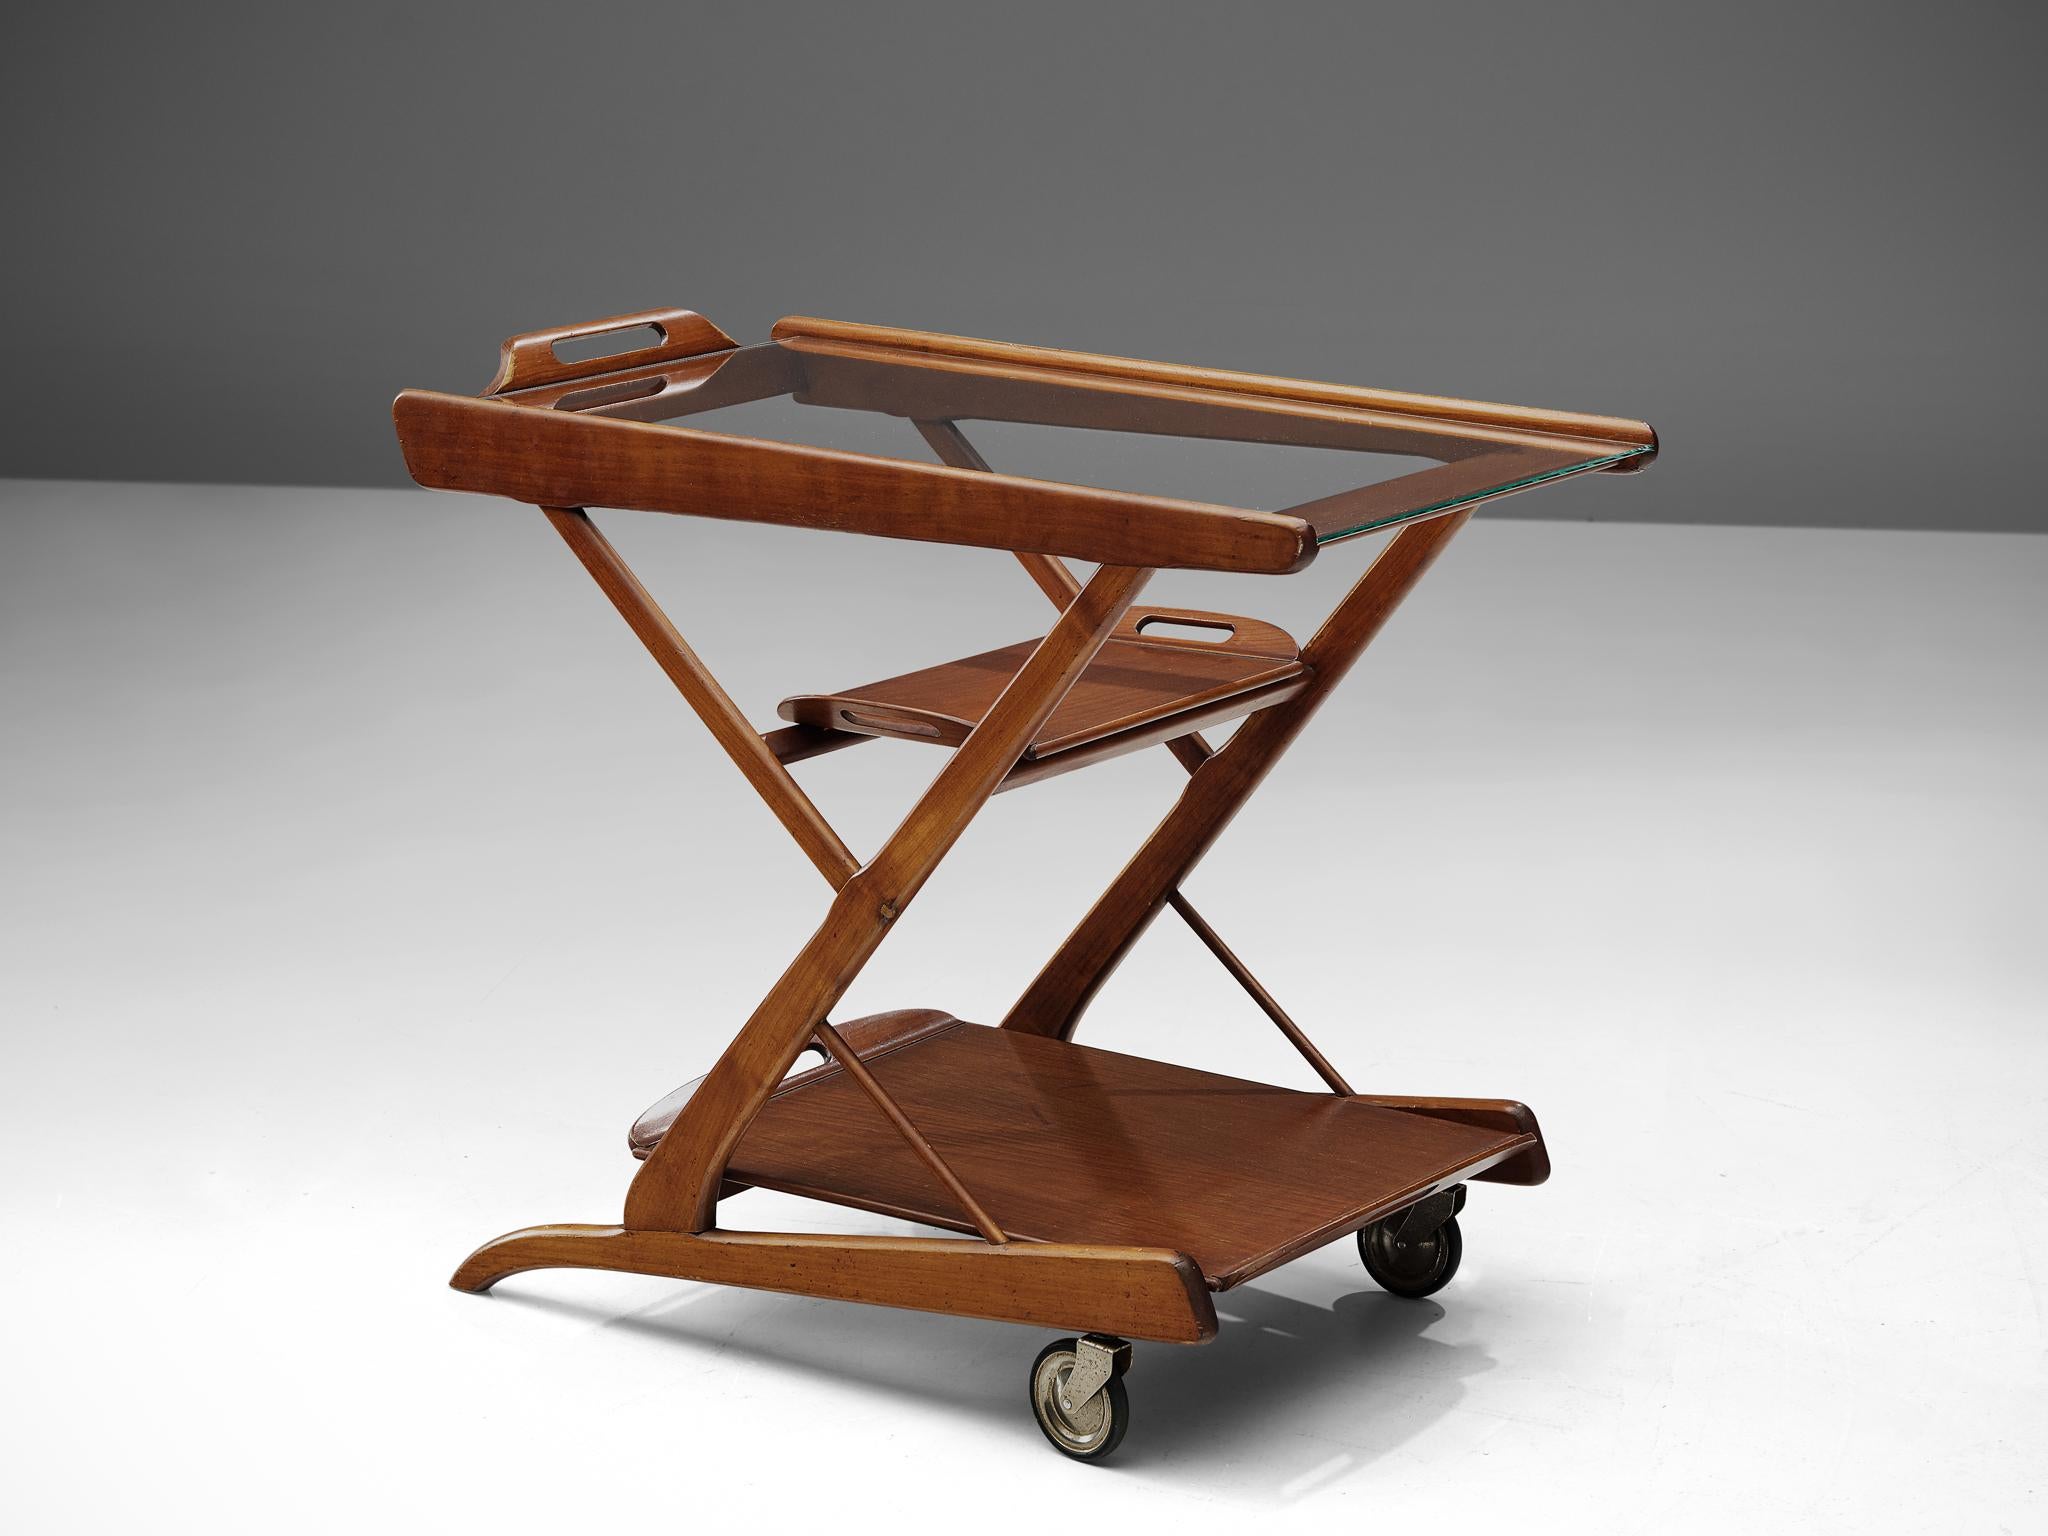 Trolley, dark wood and glass, Italy, 1960s.

This trolley is executed with a wooden frame, glass top and metal wheels. A composition of strong lines that create a Z-shape from the side. The two removable trays turn this trolley into a versatile